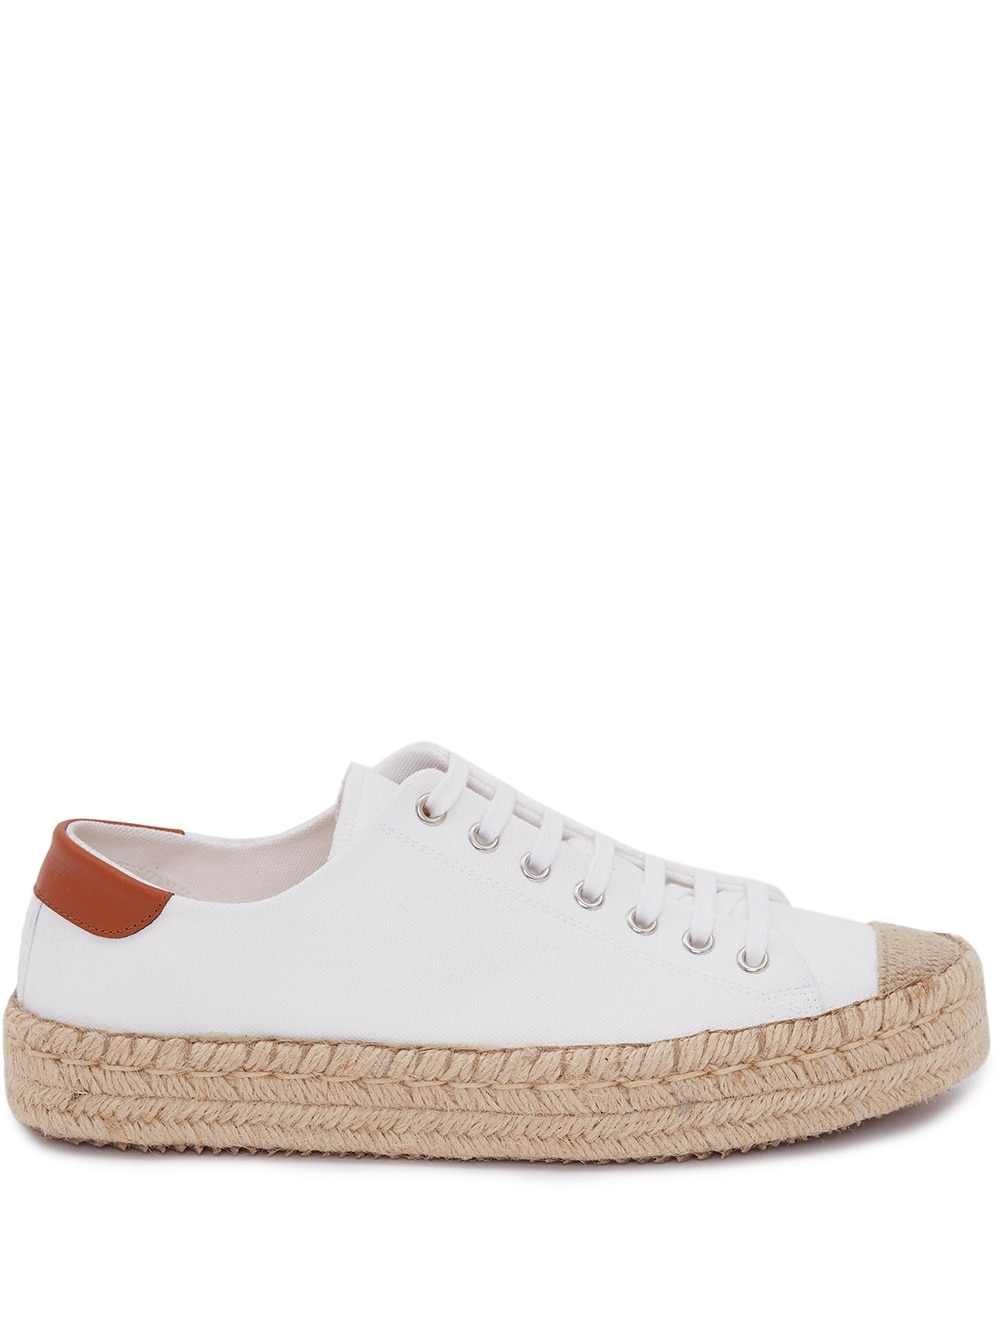 JW Anderson cotton espadrille sneakers - White